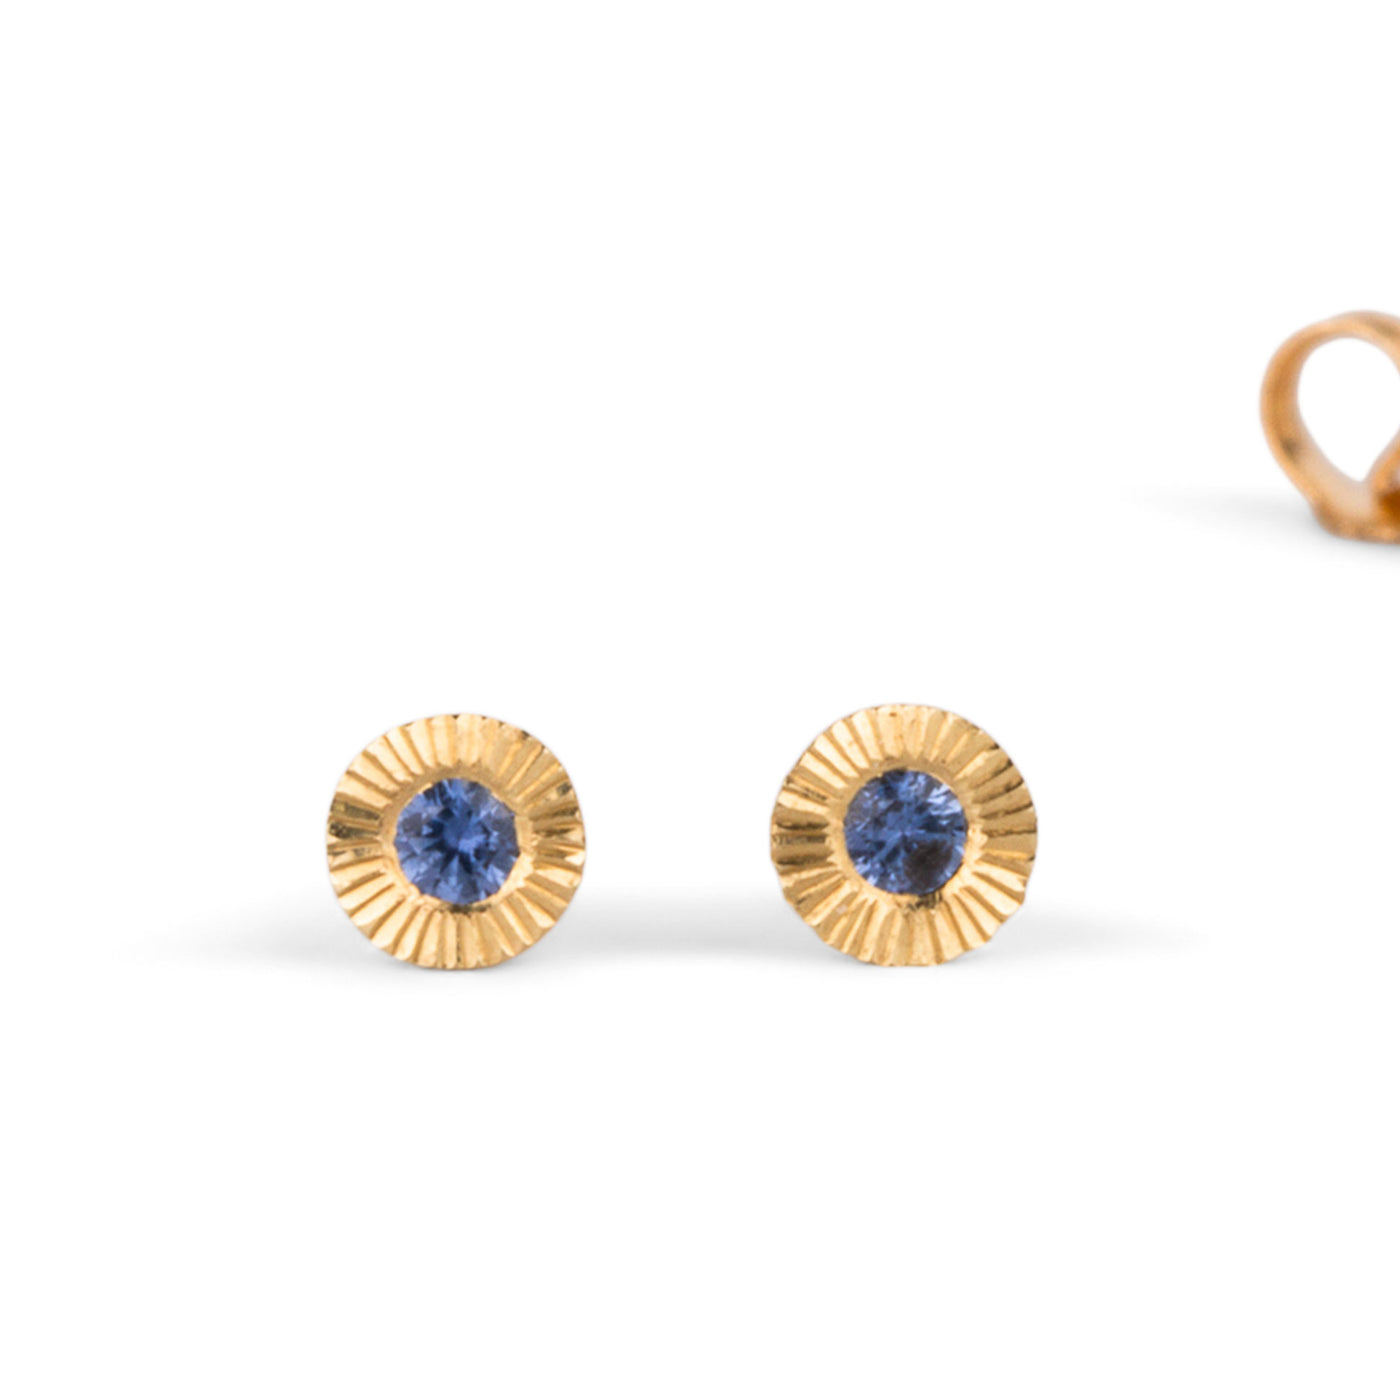 14k yellow gold small engraved Aurora stud earrings with blue Yogo Montana Sapphires on a white background